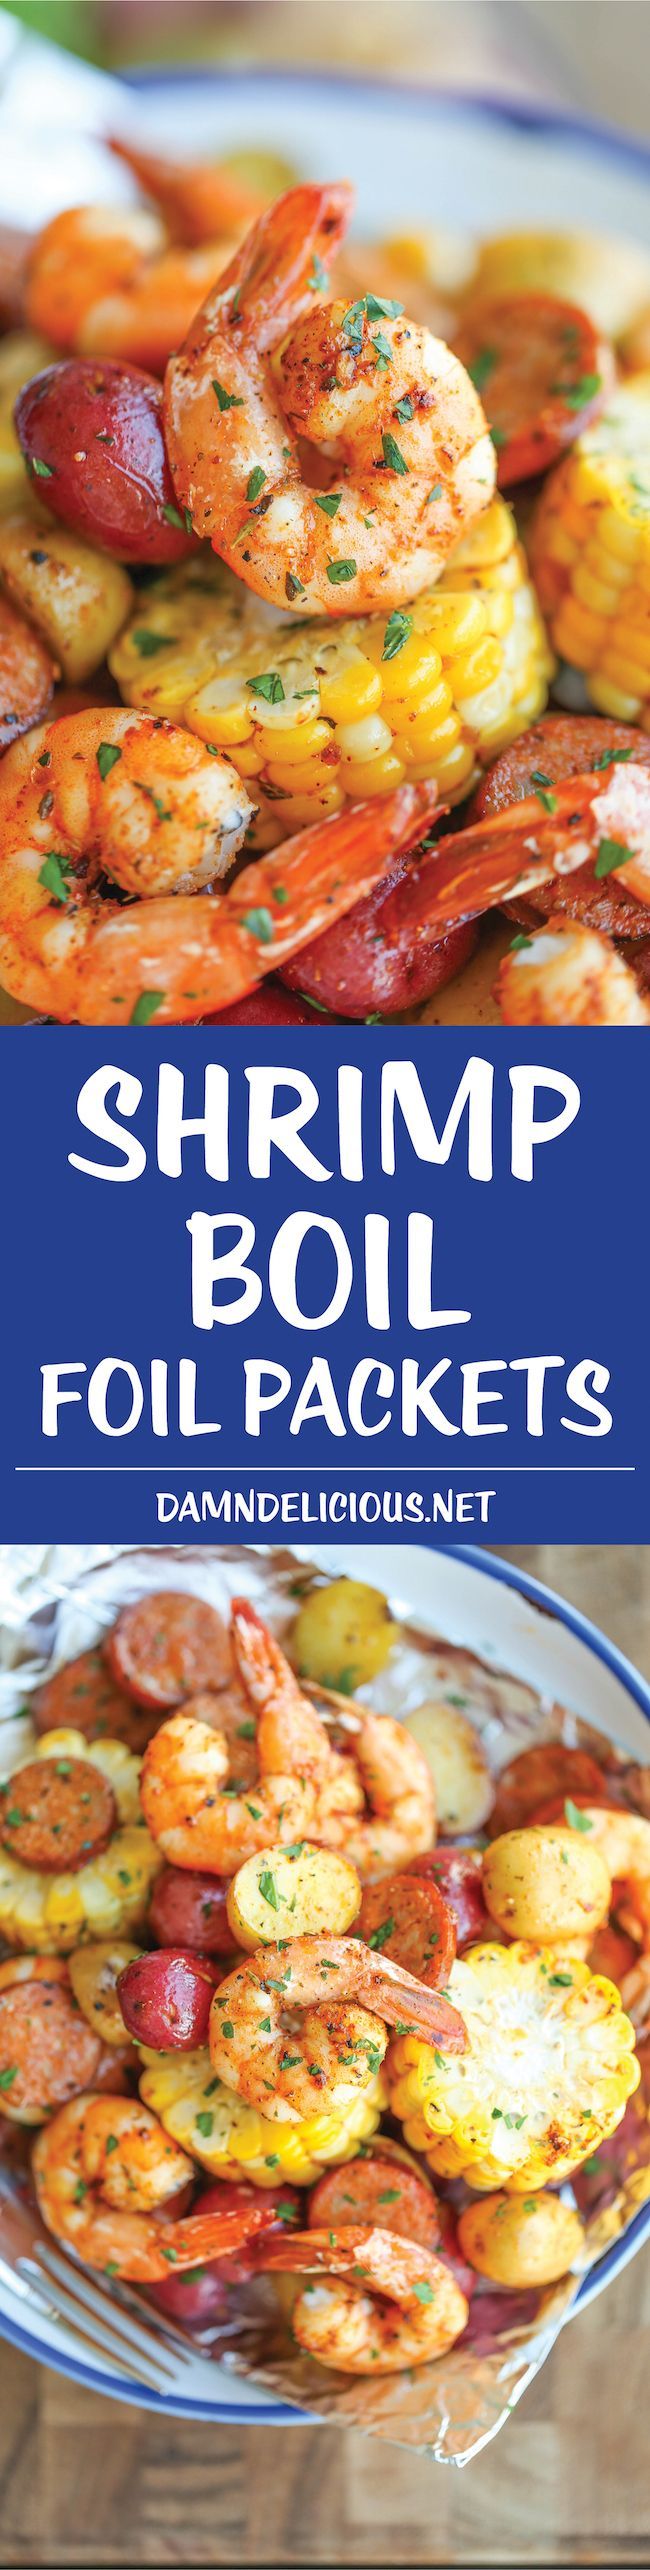 Shrimp Boil Foil Packets – Easy, make-ahead foil packets packed with shrimp, sausage, corn and potatoes. Its a full meal with zero